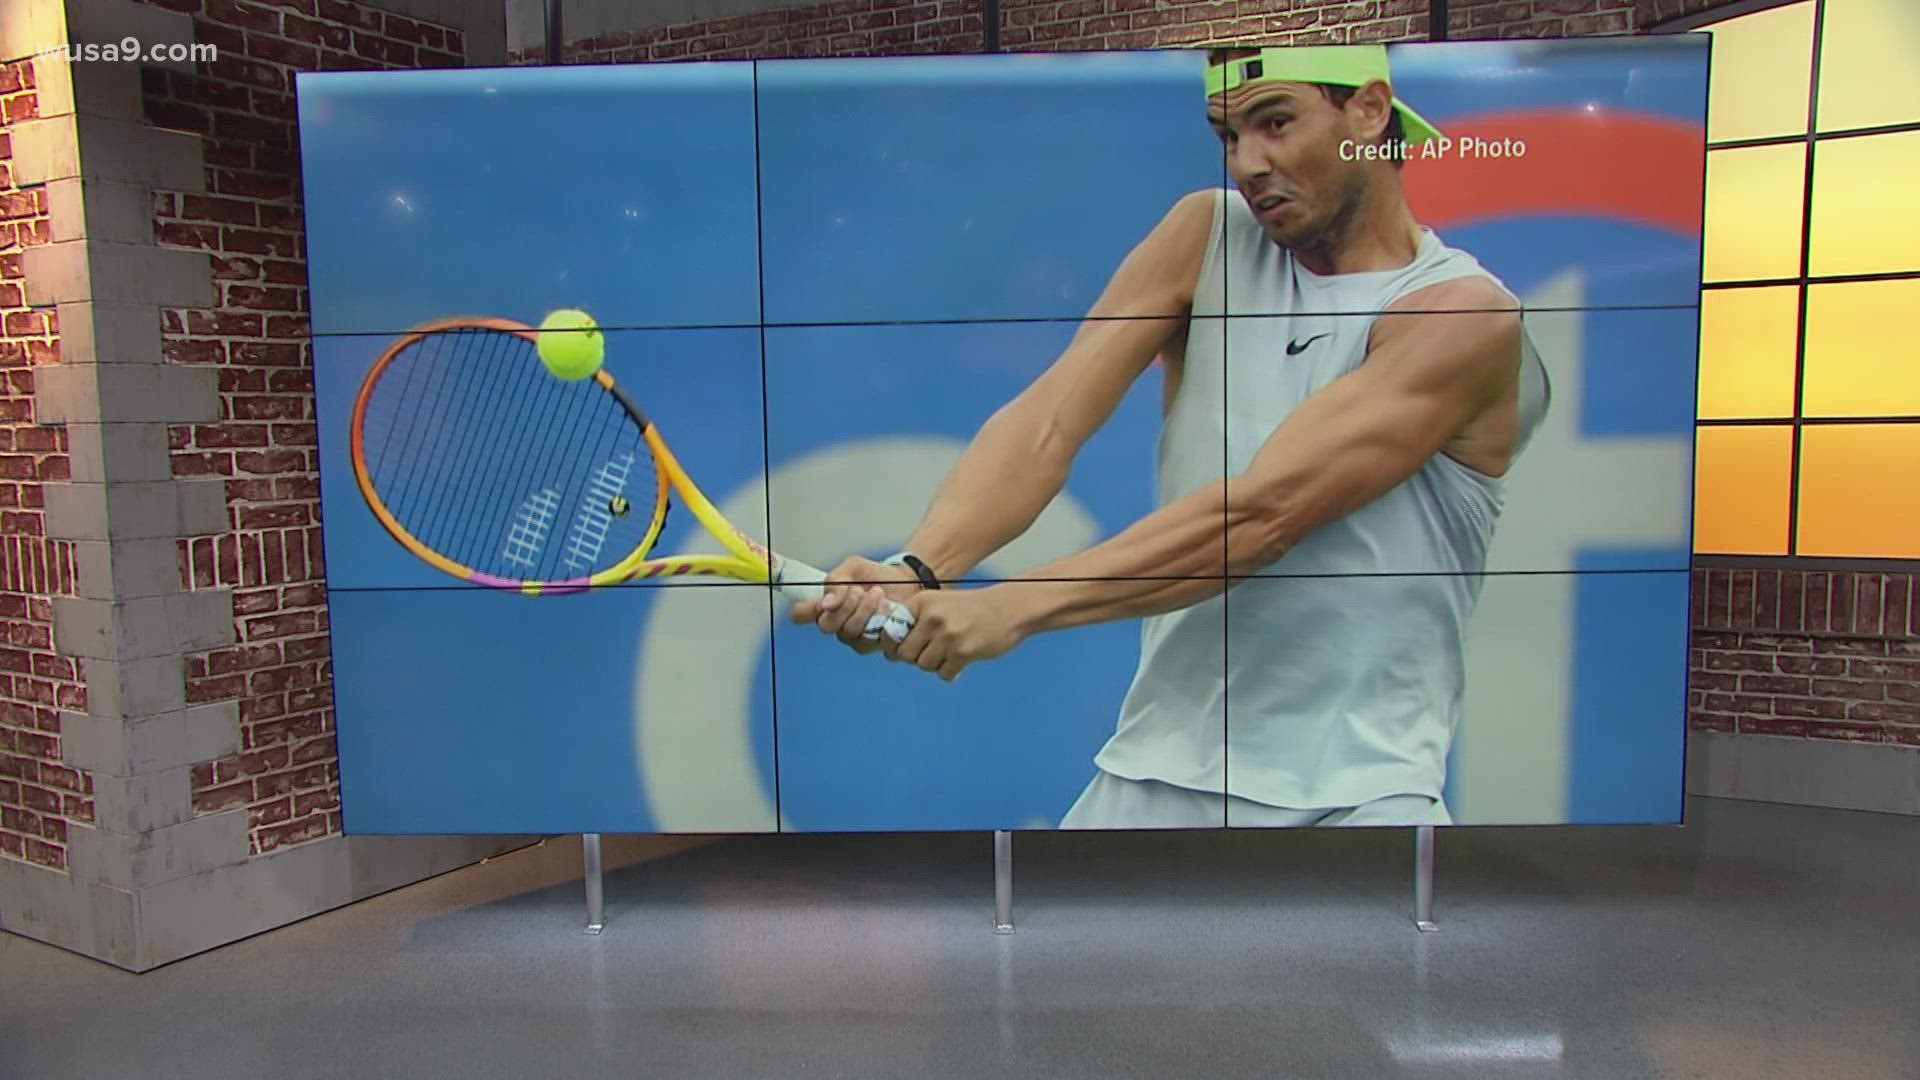 Nadal is visiting DC for the first time while he competes in the Citi Open.